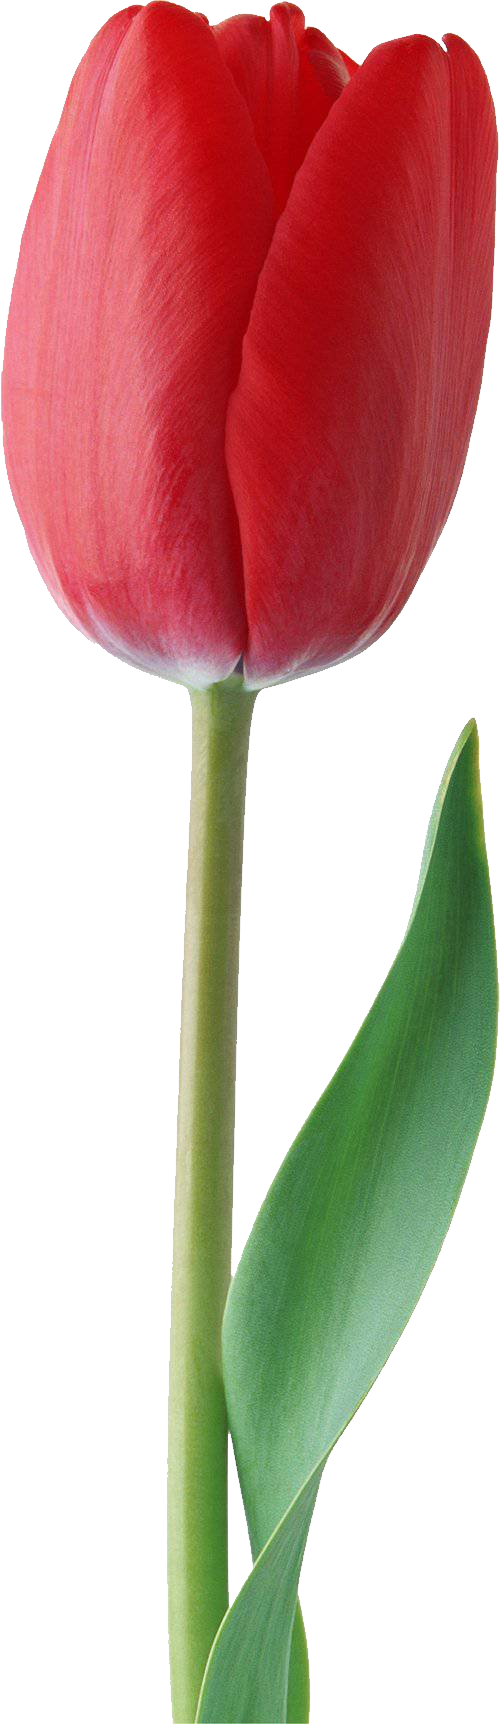 Tulip PNG Images HD